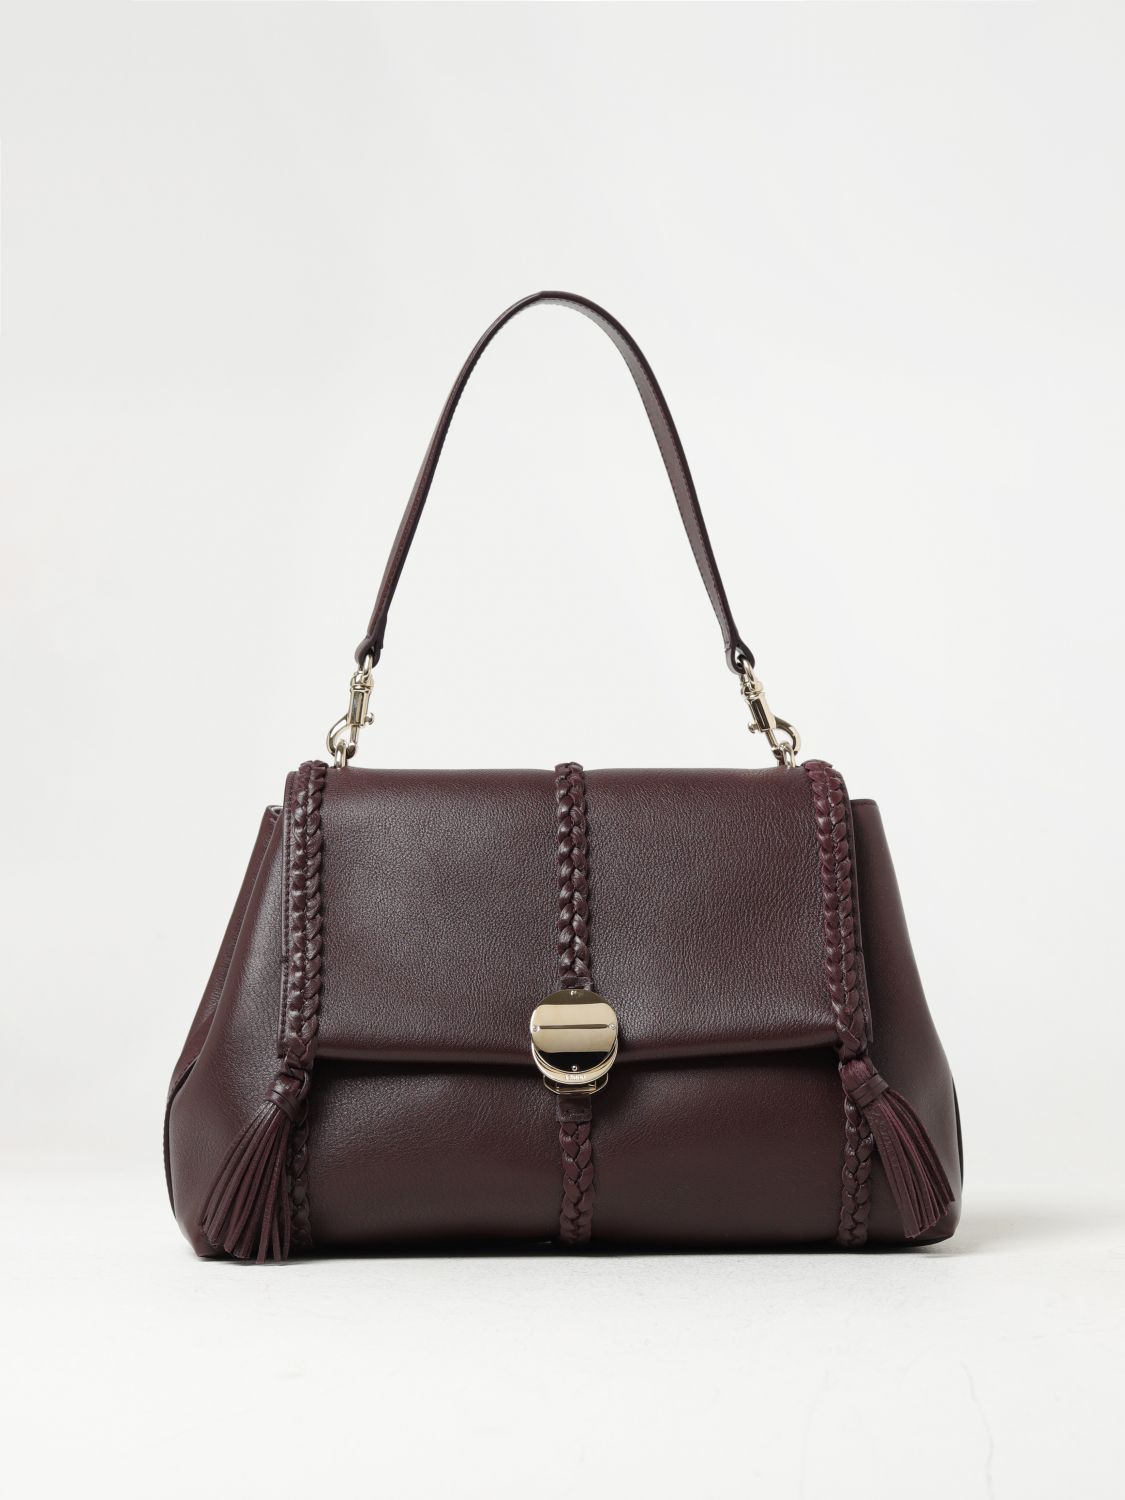 Chloé Penelope Bag In Grained Leather In Violet